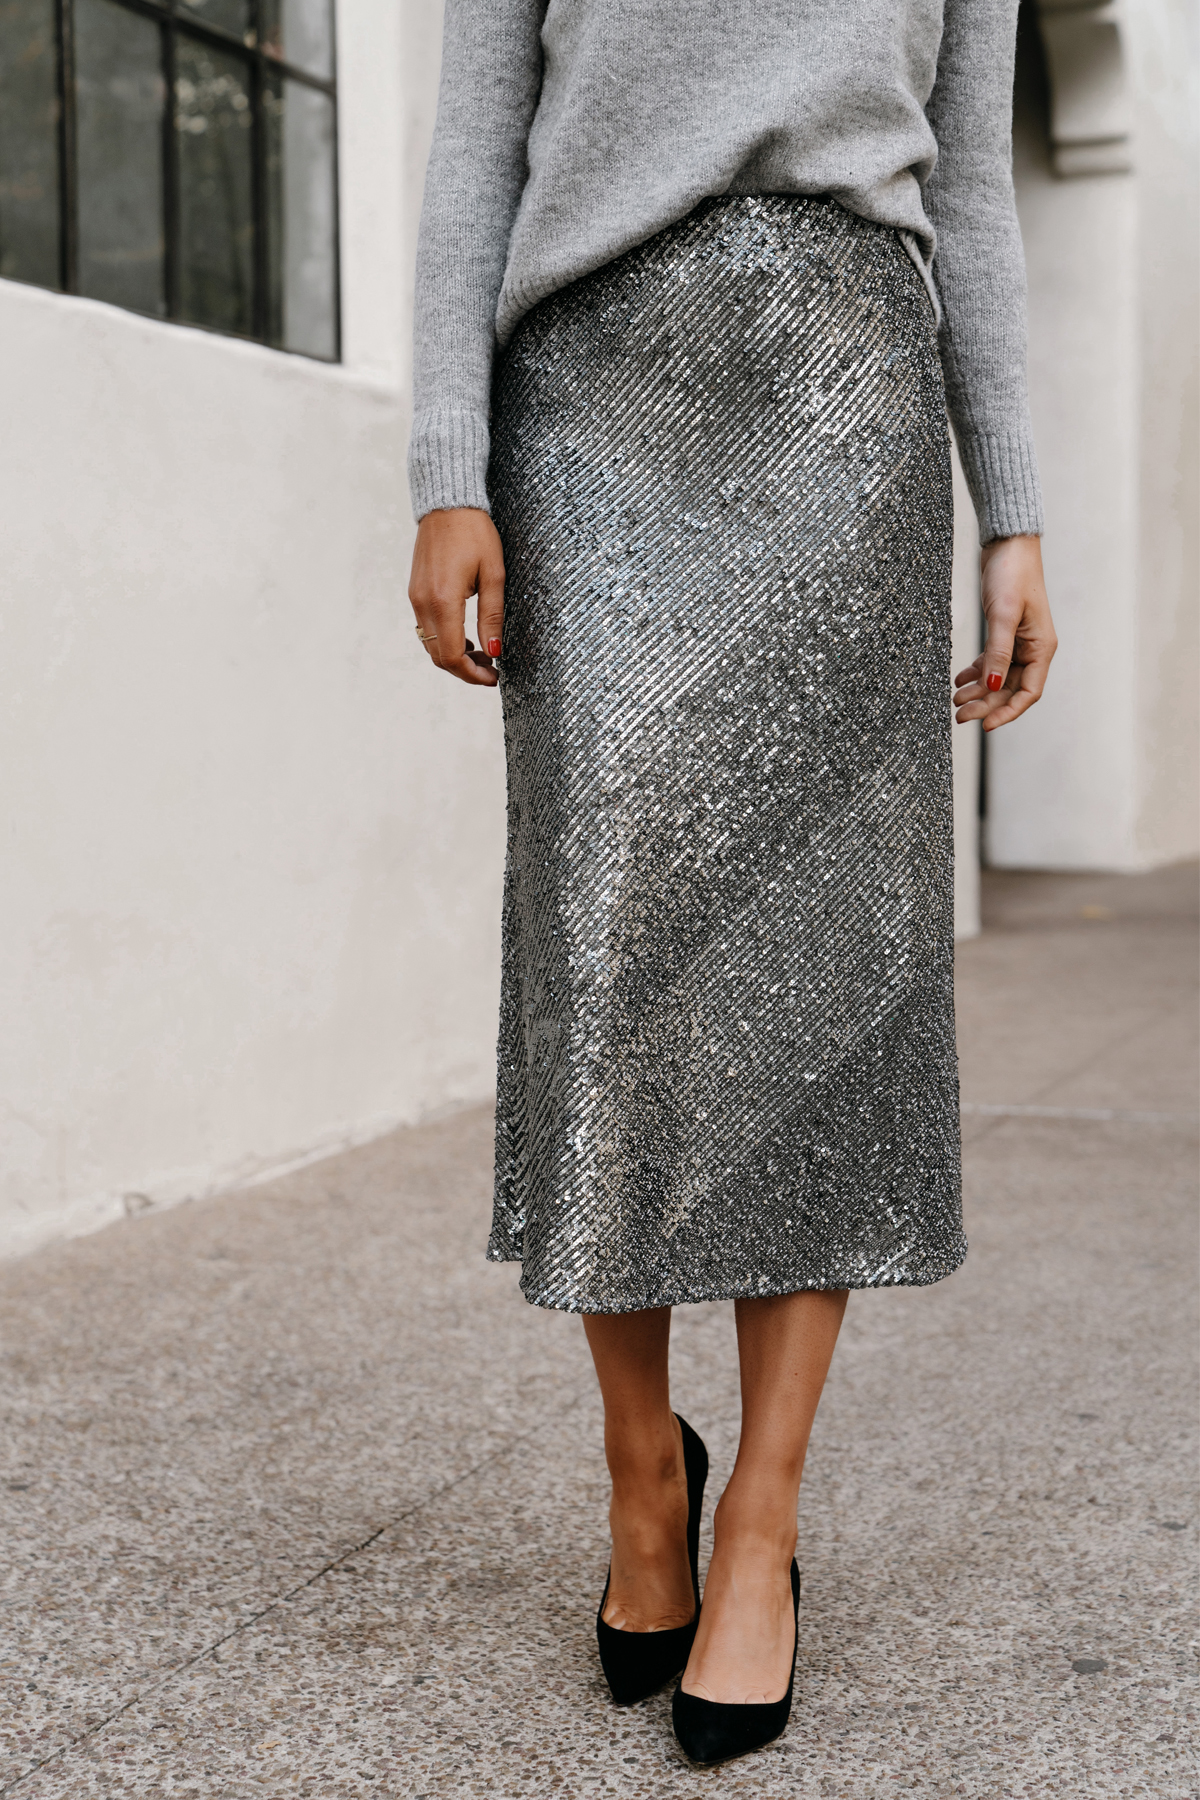 Fashion Jackson Wearing Ann Taylor Silver Sequin Skirt Outfit Grey Sweater Black Pumps